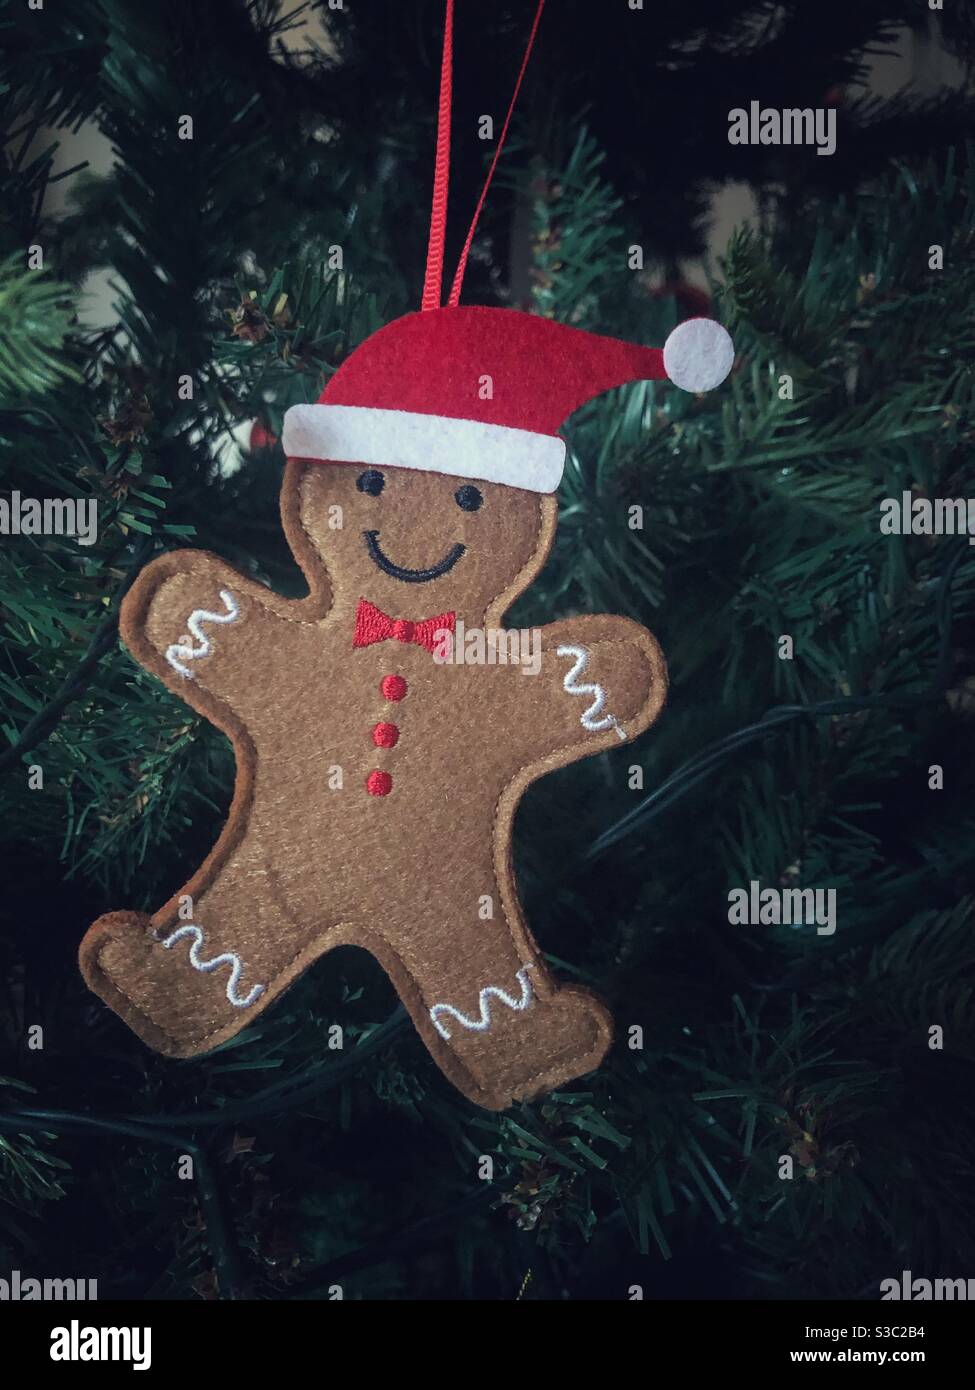 A happy gingerbread man or person Christmas tree decoration hanging on a Christmas tree with a Santa hat on Stock Photo